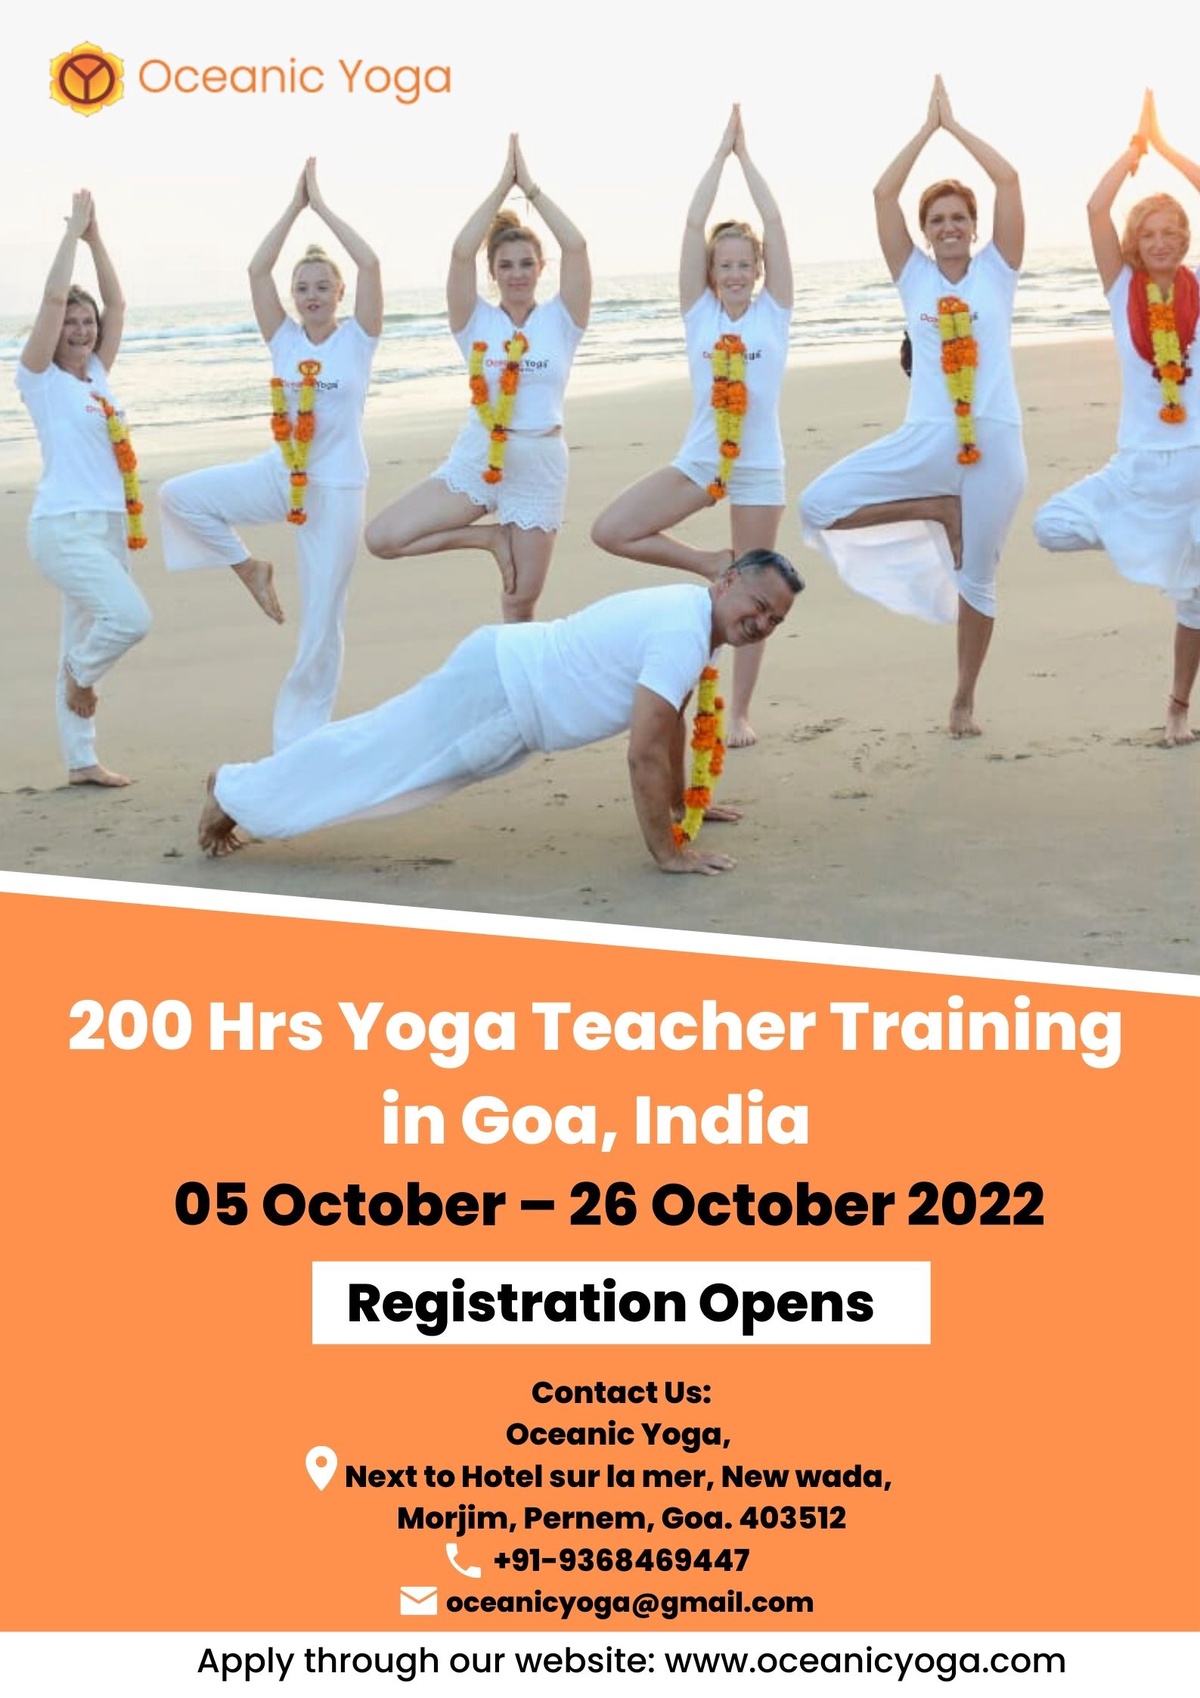 Yoga teacher training in India - perspectives, and opportunities